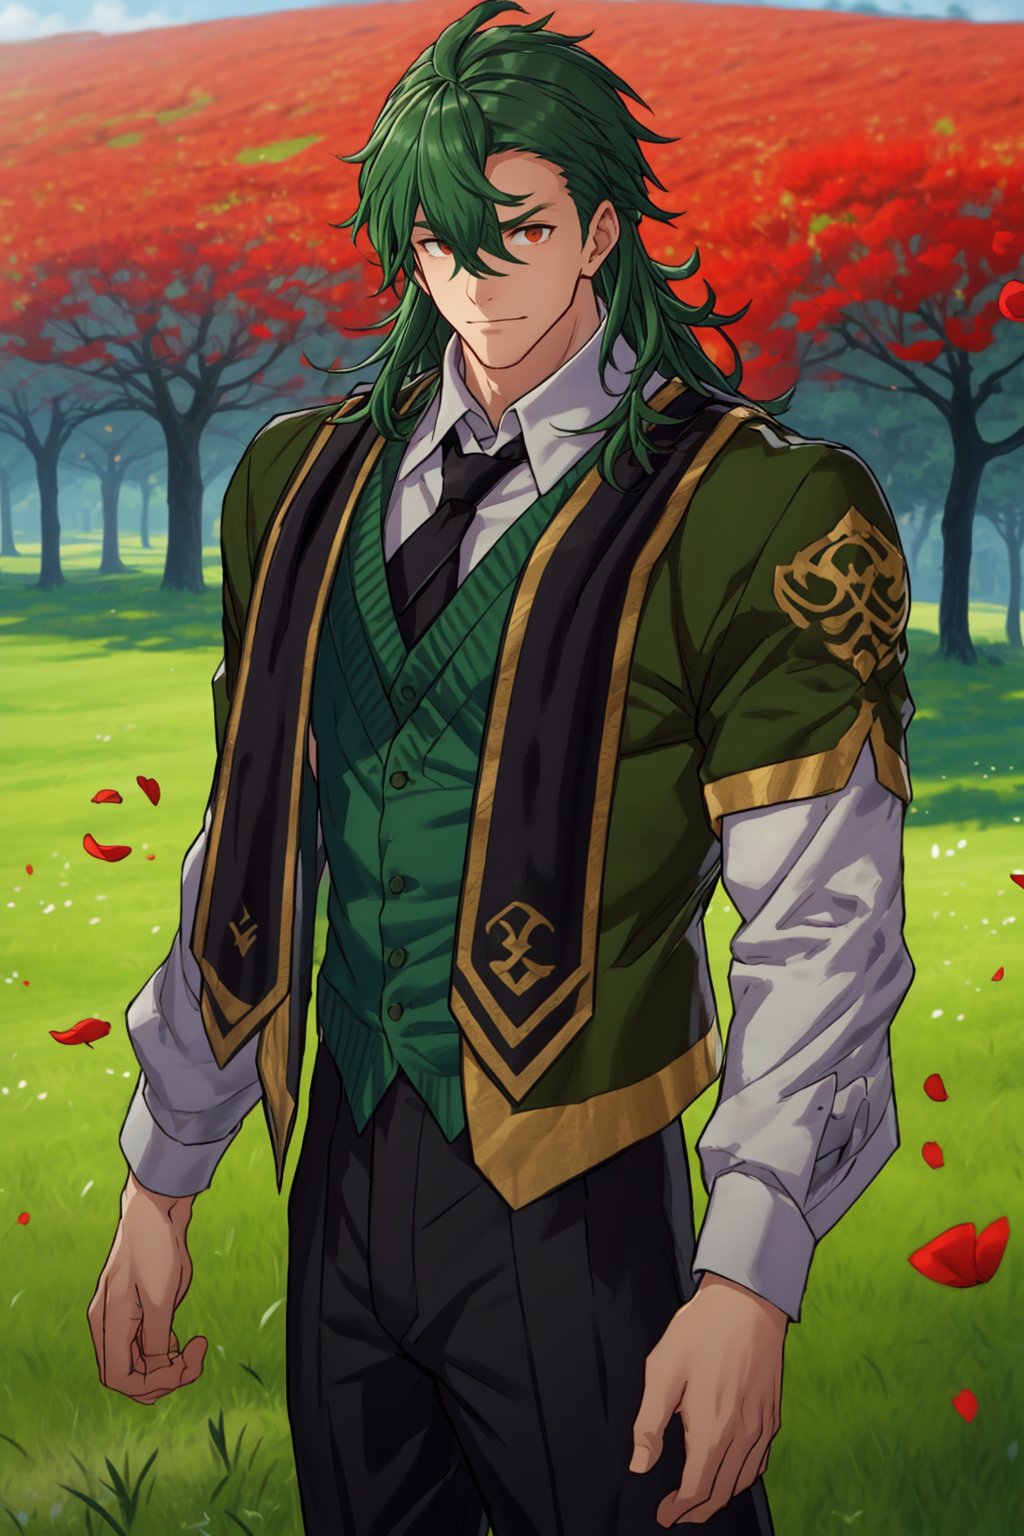 Gregory,  Man,  Masculine,  Masterpiece,  High Quality,  Confident,  Rugged,  Dark Green Long Hair,  White Collared Shirt,  Green Vest,  Scarf,  Black Necktie,  Grassy Field,  Oak Trees,  Delicate Red Flowers Everywhere,  Tiny Red Petals Floating in the Wind,  Red Petals Falling Everywhere,  Very Broad Shoulders,  Large Pectorals,  Muscular,  Large Muscles,  Manly,  Handsome,  Character in the Whole Frame,<lora:EMS-254033-EMS:0.700000>,<lora:EMS-179-EMS:0.600000>